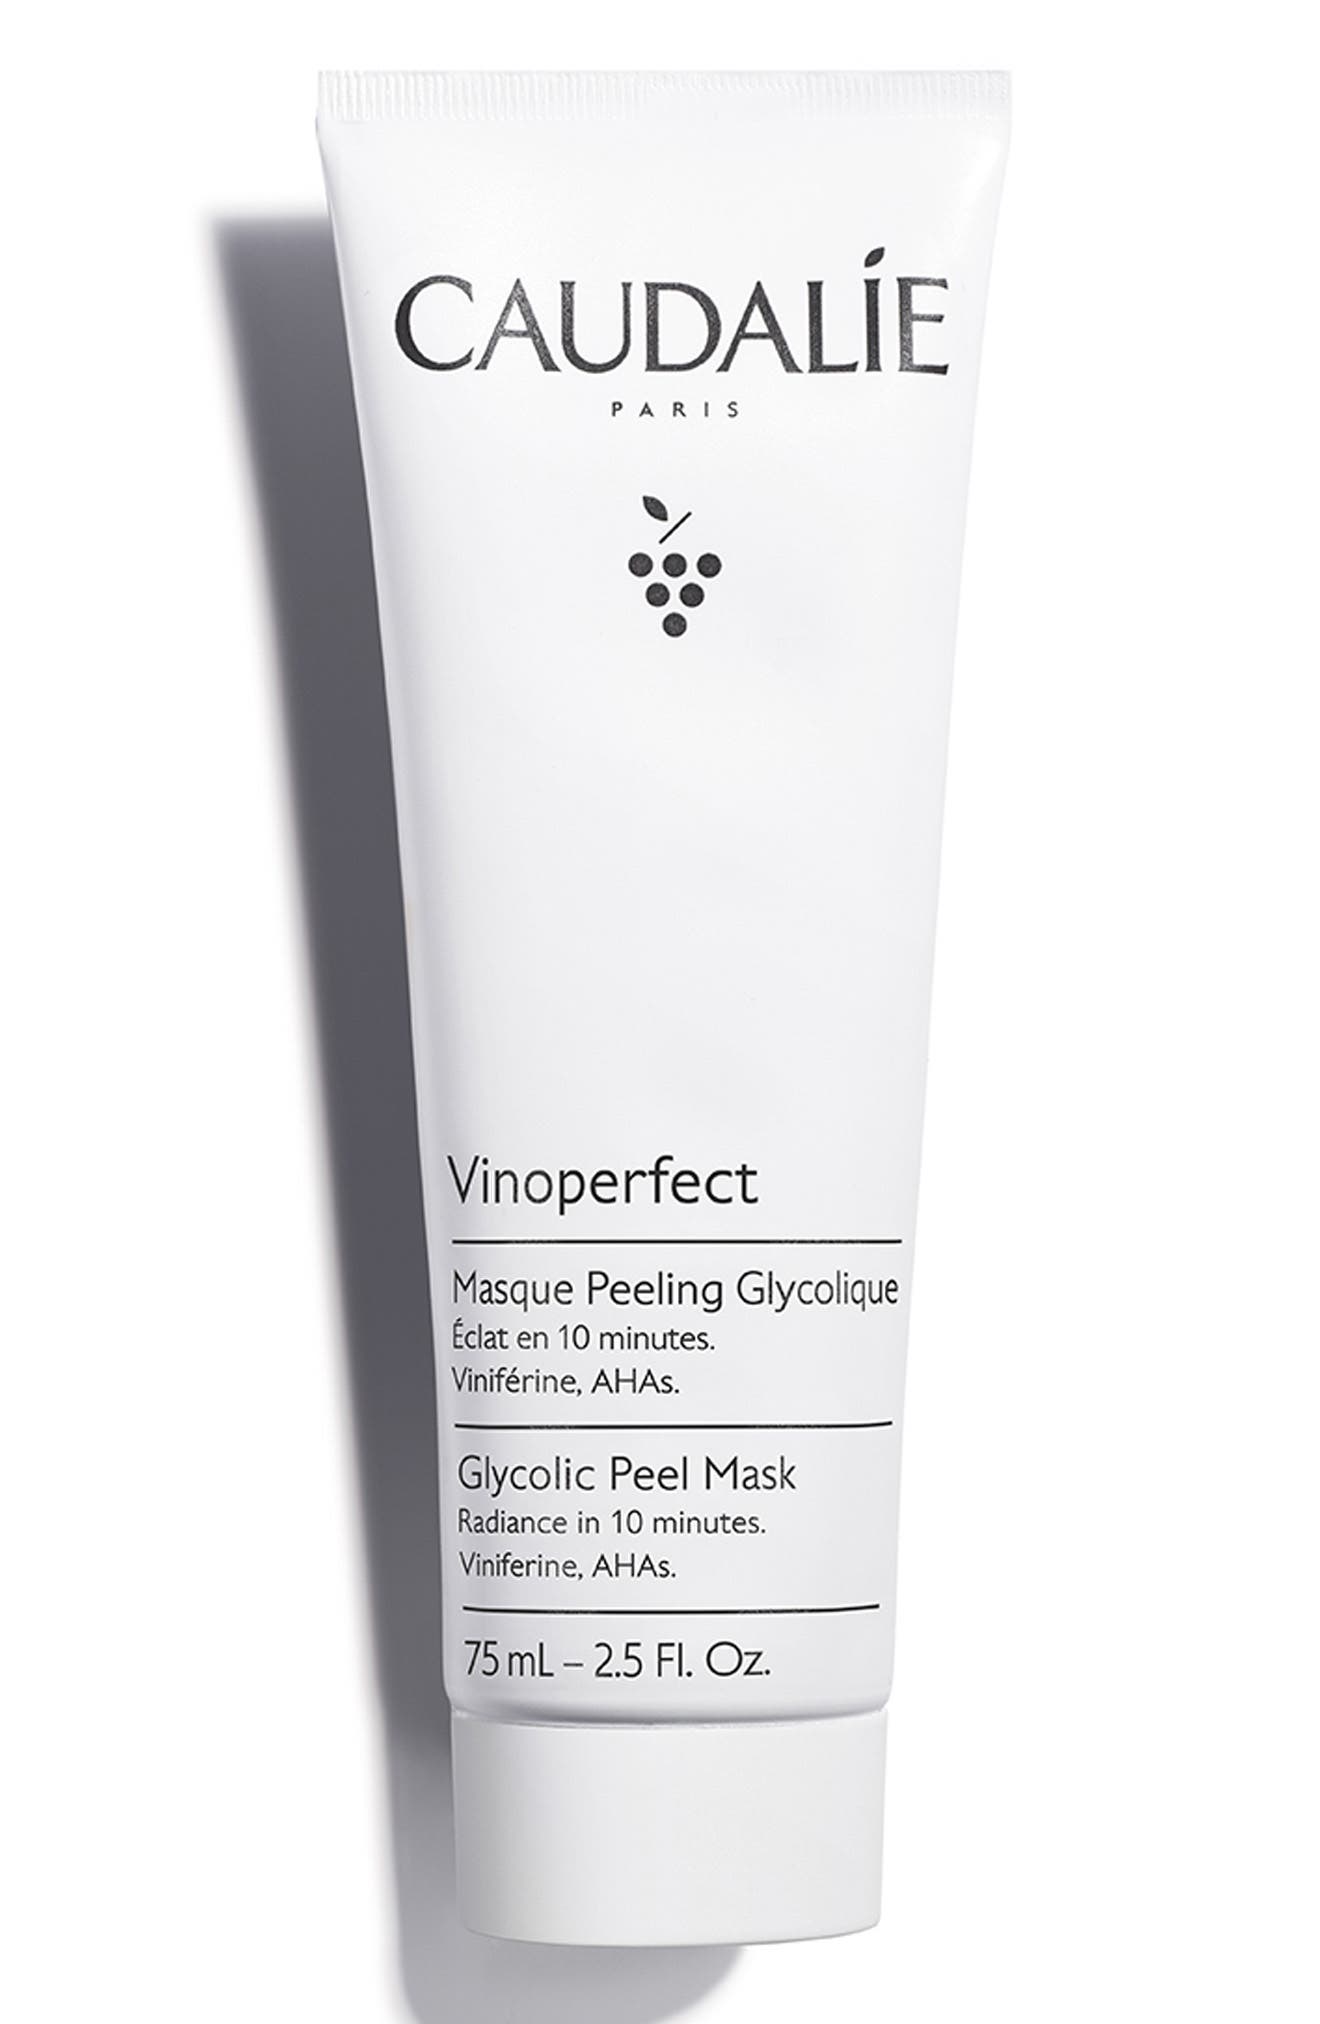 CAUDALIE Vinoperfect Glycolic Peel Face Mask at Nordstrom, Size 2.5 Oz